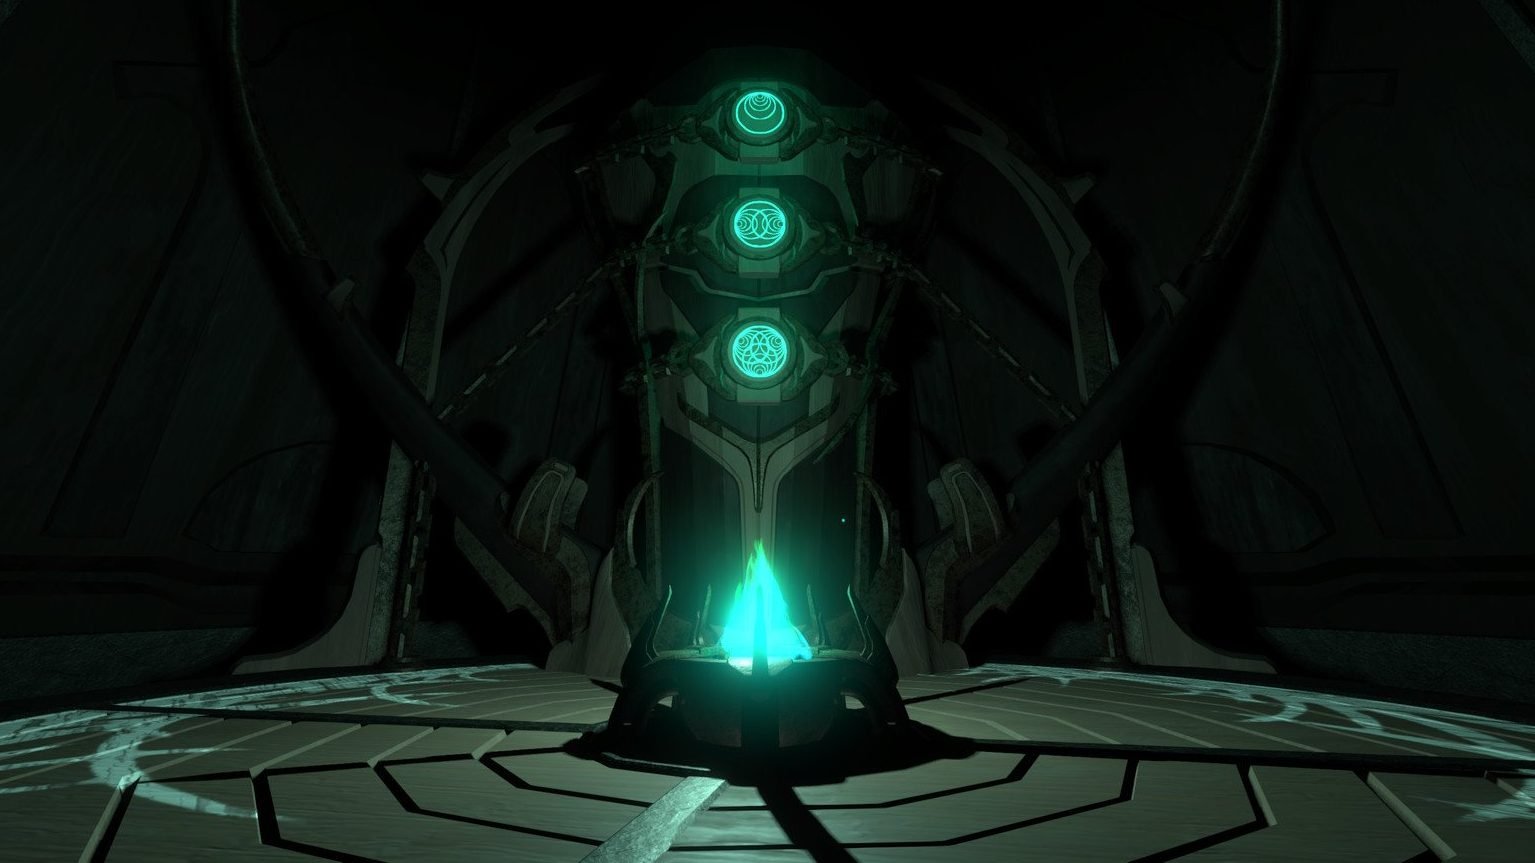 A large part of the mystery in Echoes of the Eye is simply figuring out what this object is.